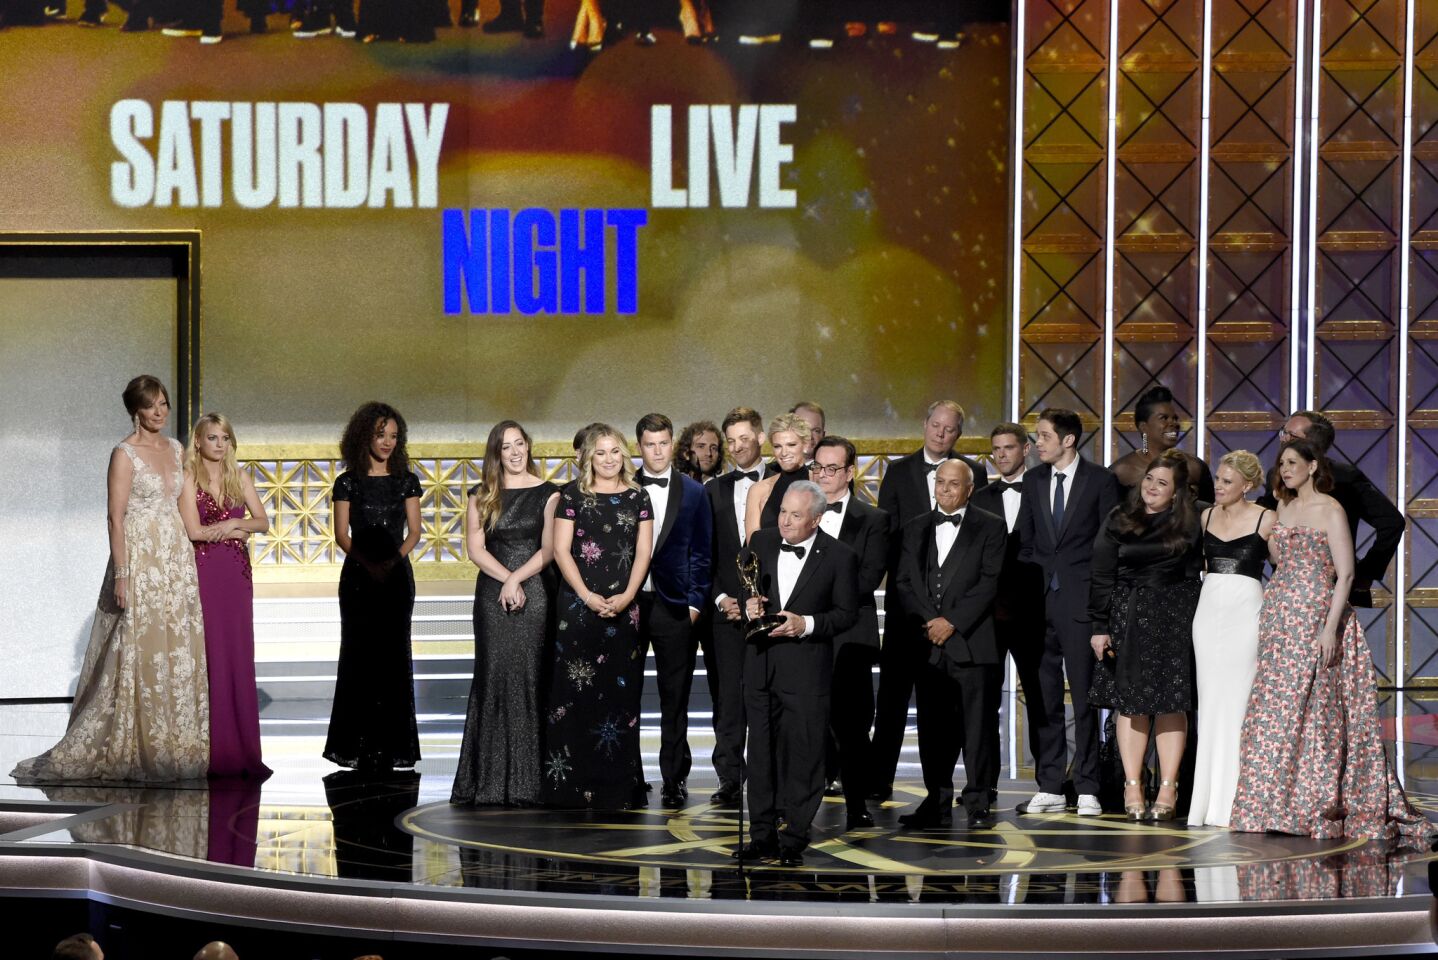 Lorne Michaels and the cast of "SNL" accept the award for outstanding variety sketch series for "Saturday Night Live" at the 69th Emmy Awards.